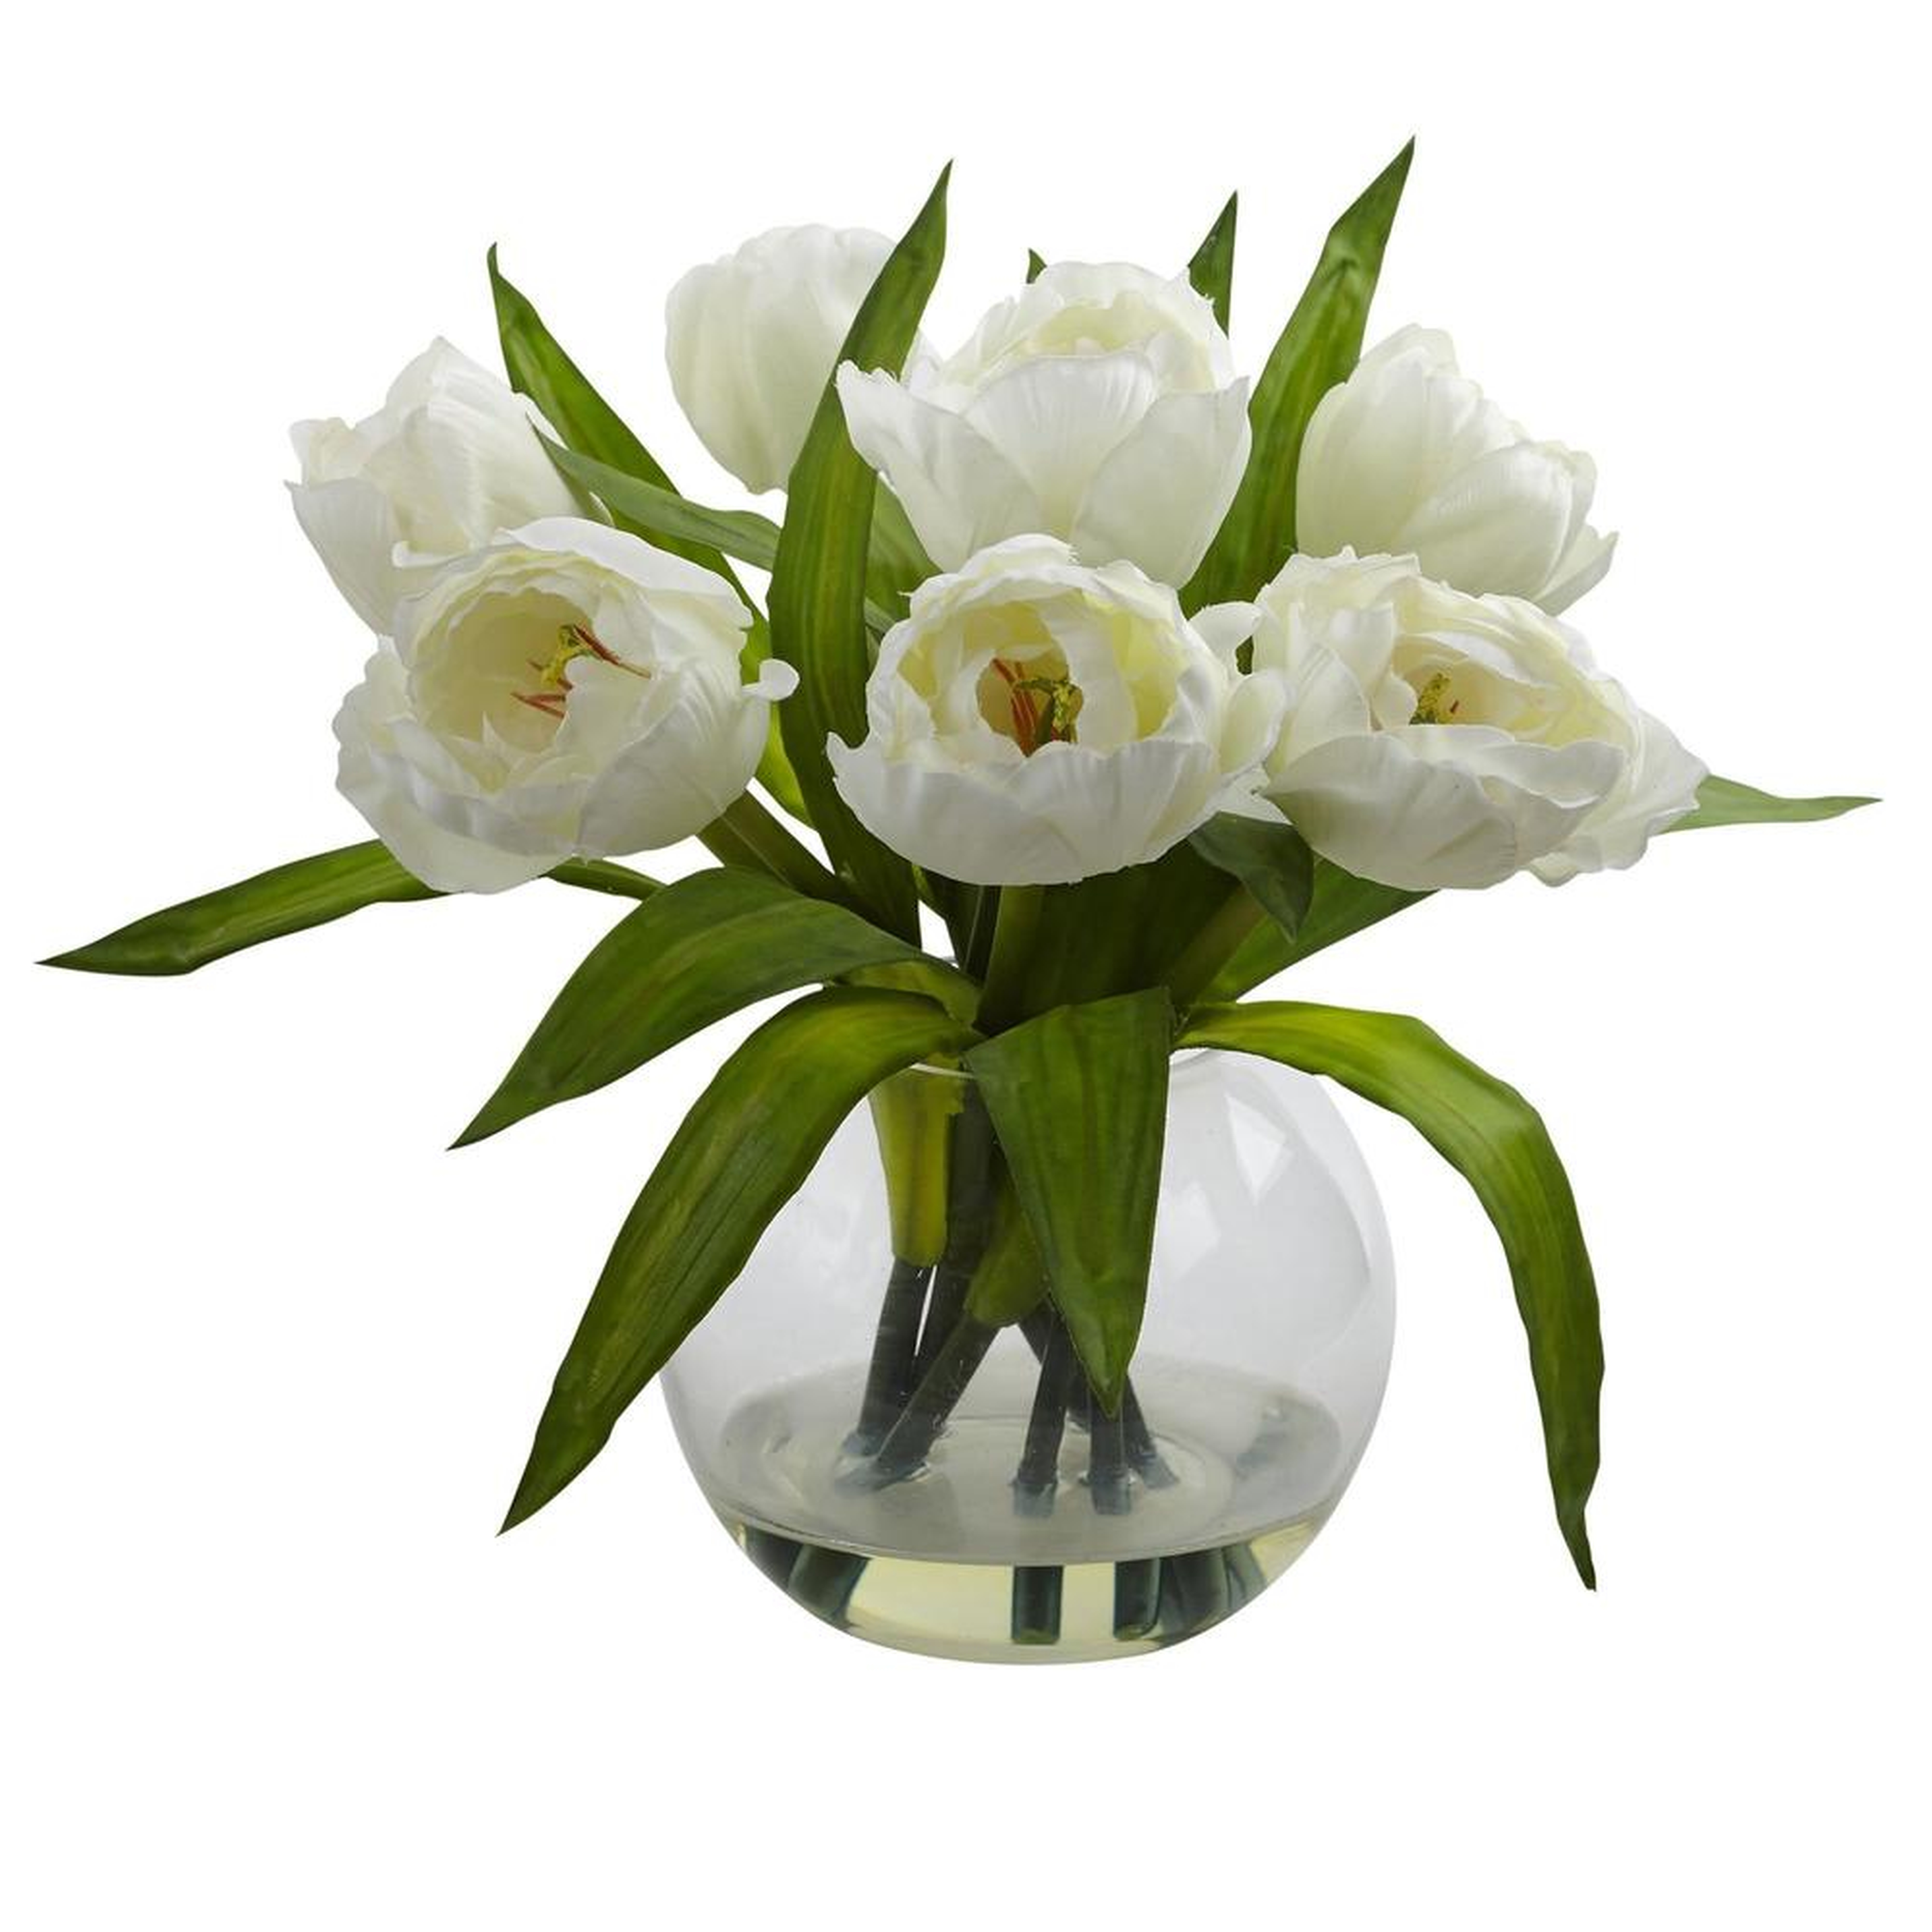 Tulips Arrangement with Clear Vase - Fiddle + Bloom